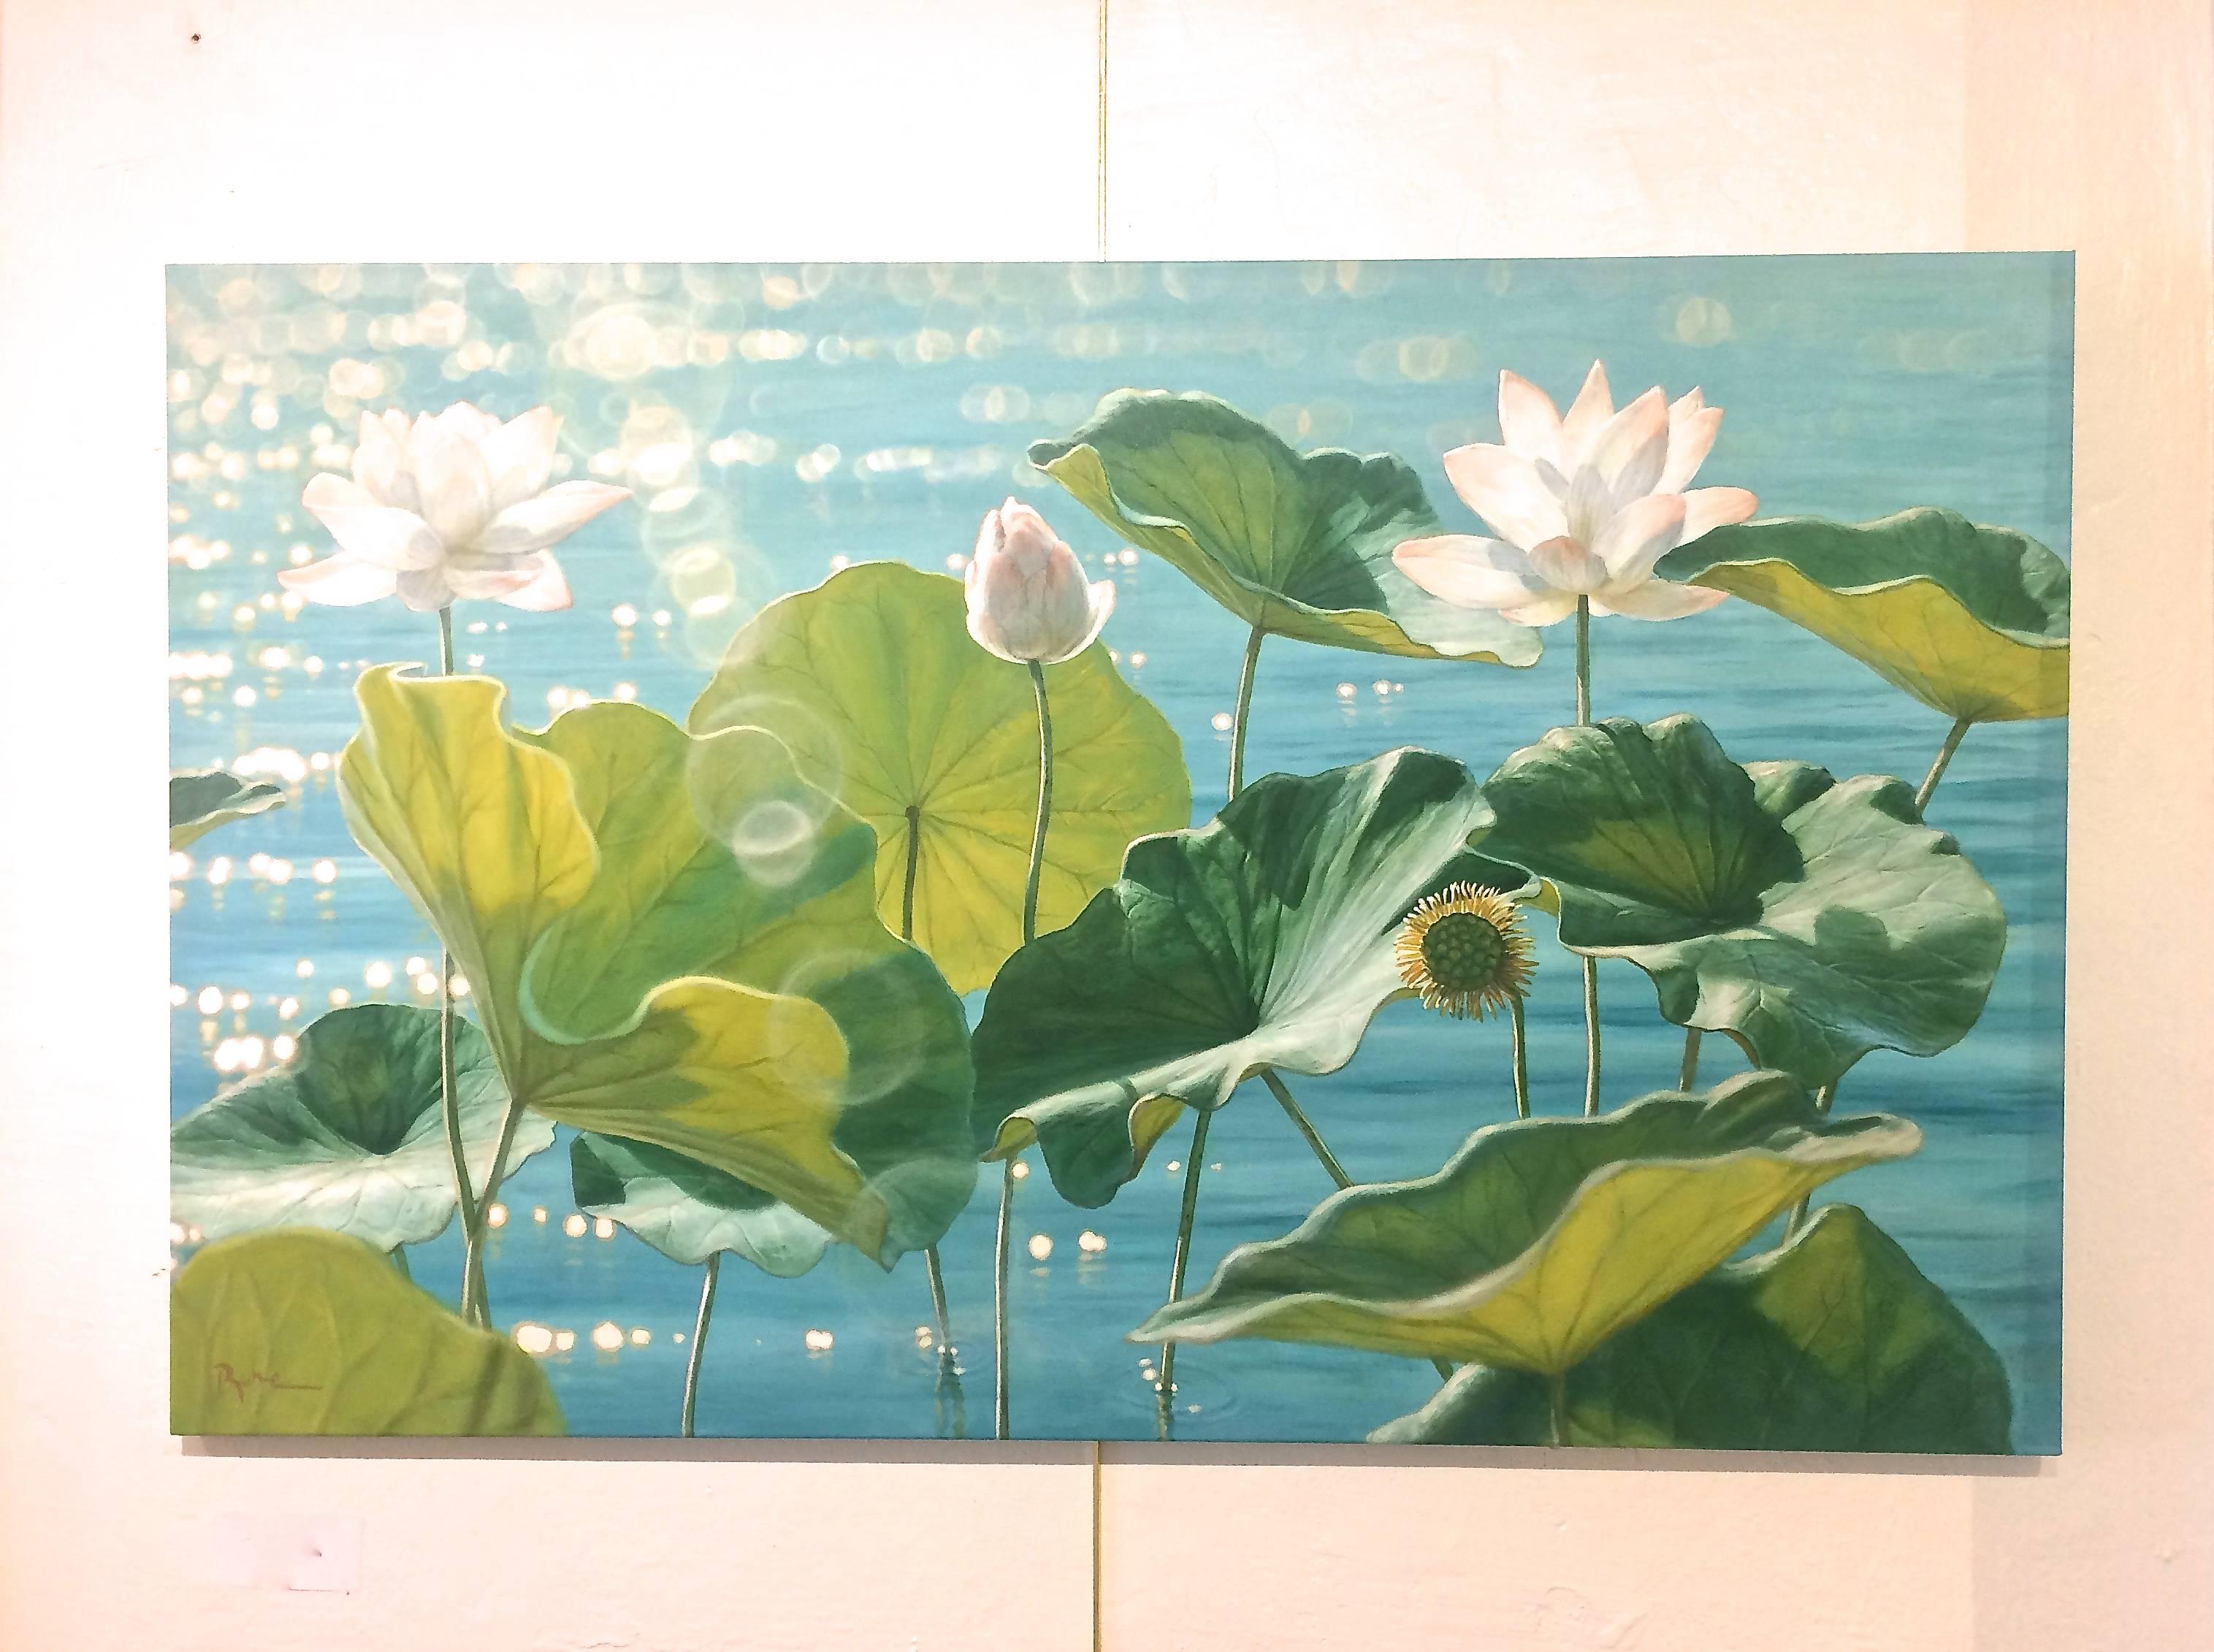 Lotus Position - Painting by David Ruhe